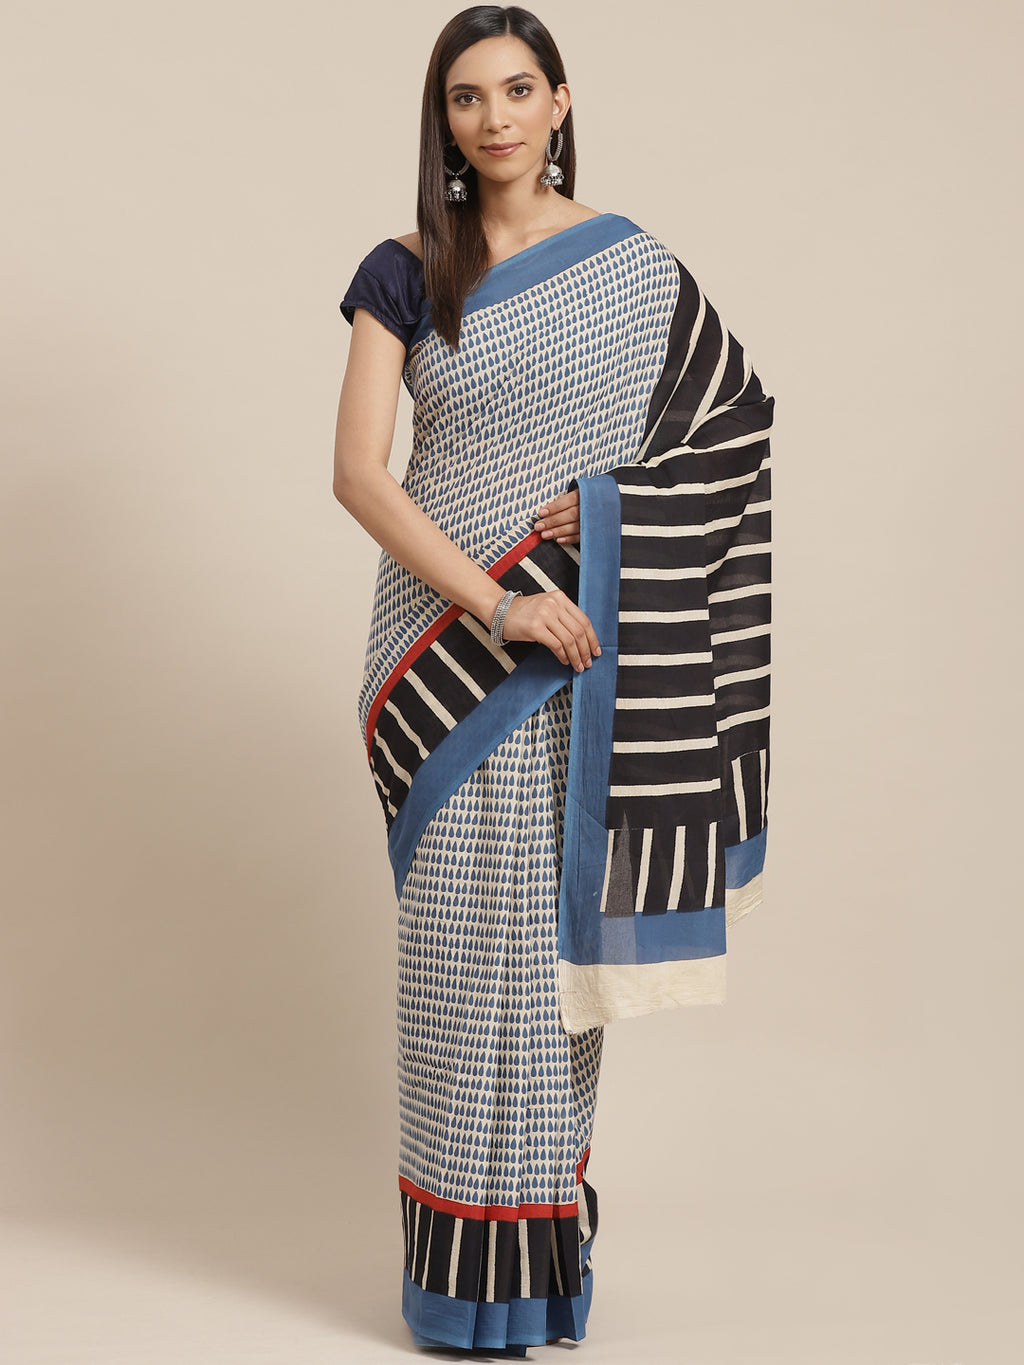 Blue and Black, Kalakari India Pure Cotton Handblock Printed Saree and Blouse RCBGSA0023-Saree-Kalakari India-RCBGSA0023-Cotton, Geographical Indication, Hand Block, Hand Crafted, Heritage Prints, Natural Dyes, Red, Sarees, Sustainable Fabrics, Woven, Yellow-[Linen,Ethnic,wear,Fashionista,Handloom,Handicraft,Indigo,blockprint,block,print,Cotton,Chanderi,Blue, latest,classy,party,bollywood,trendy,summer,style,traditional,formal,elegant,unique,style,hand,block,print, dabu,booti,gift,present,glamor